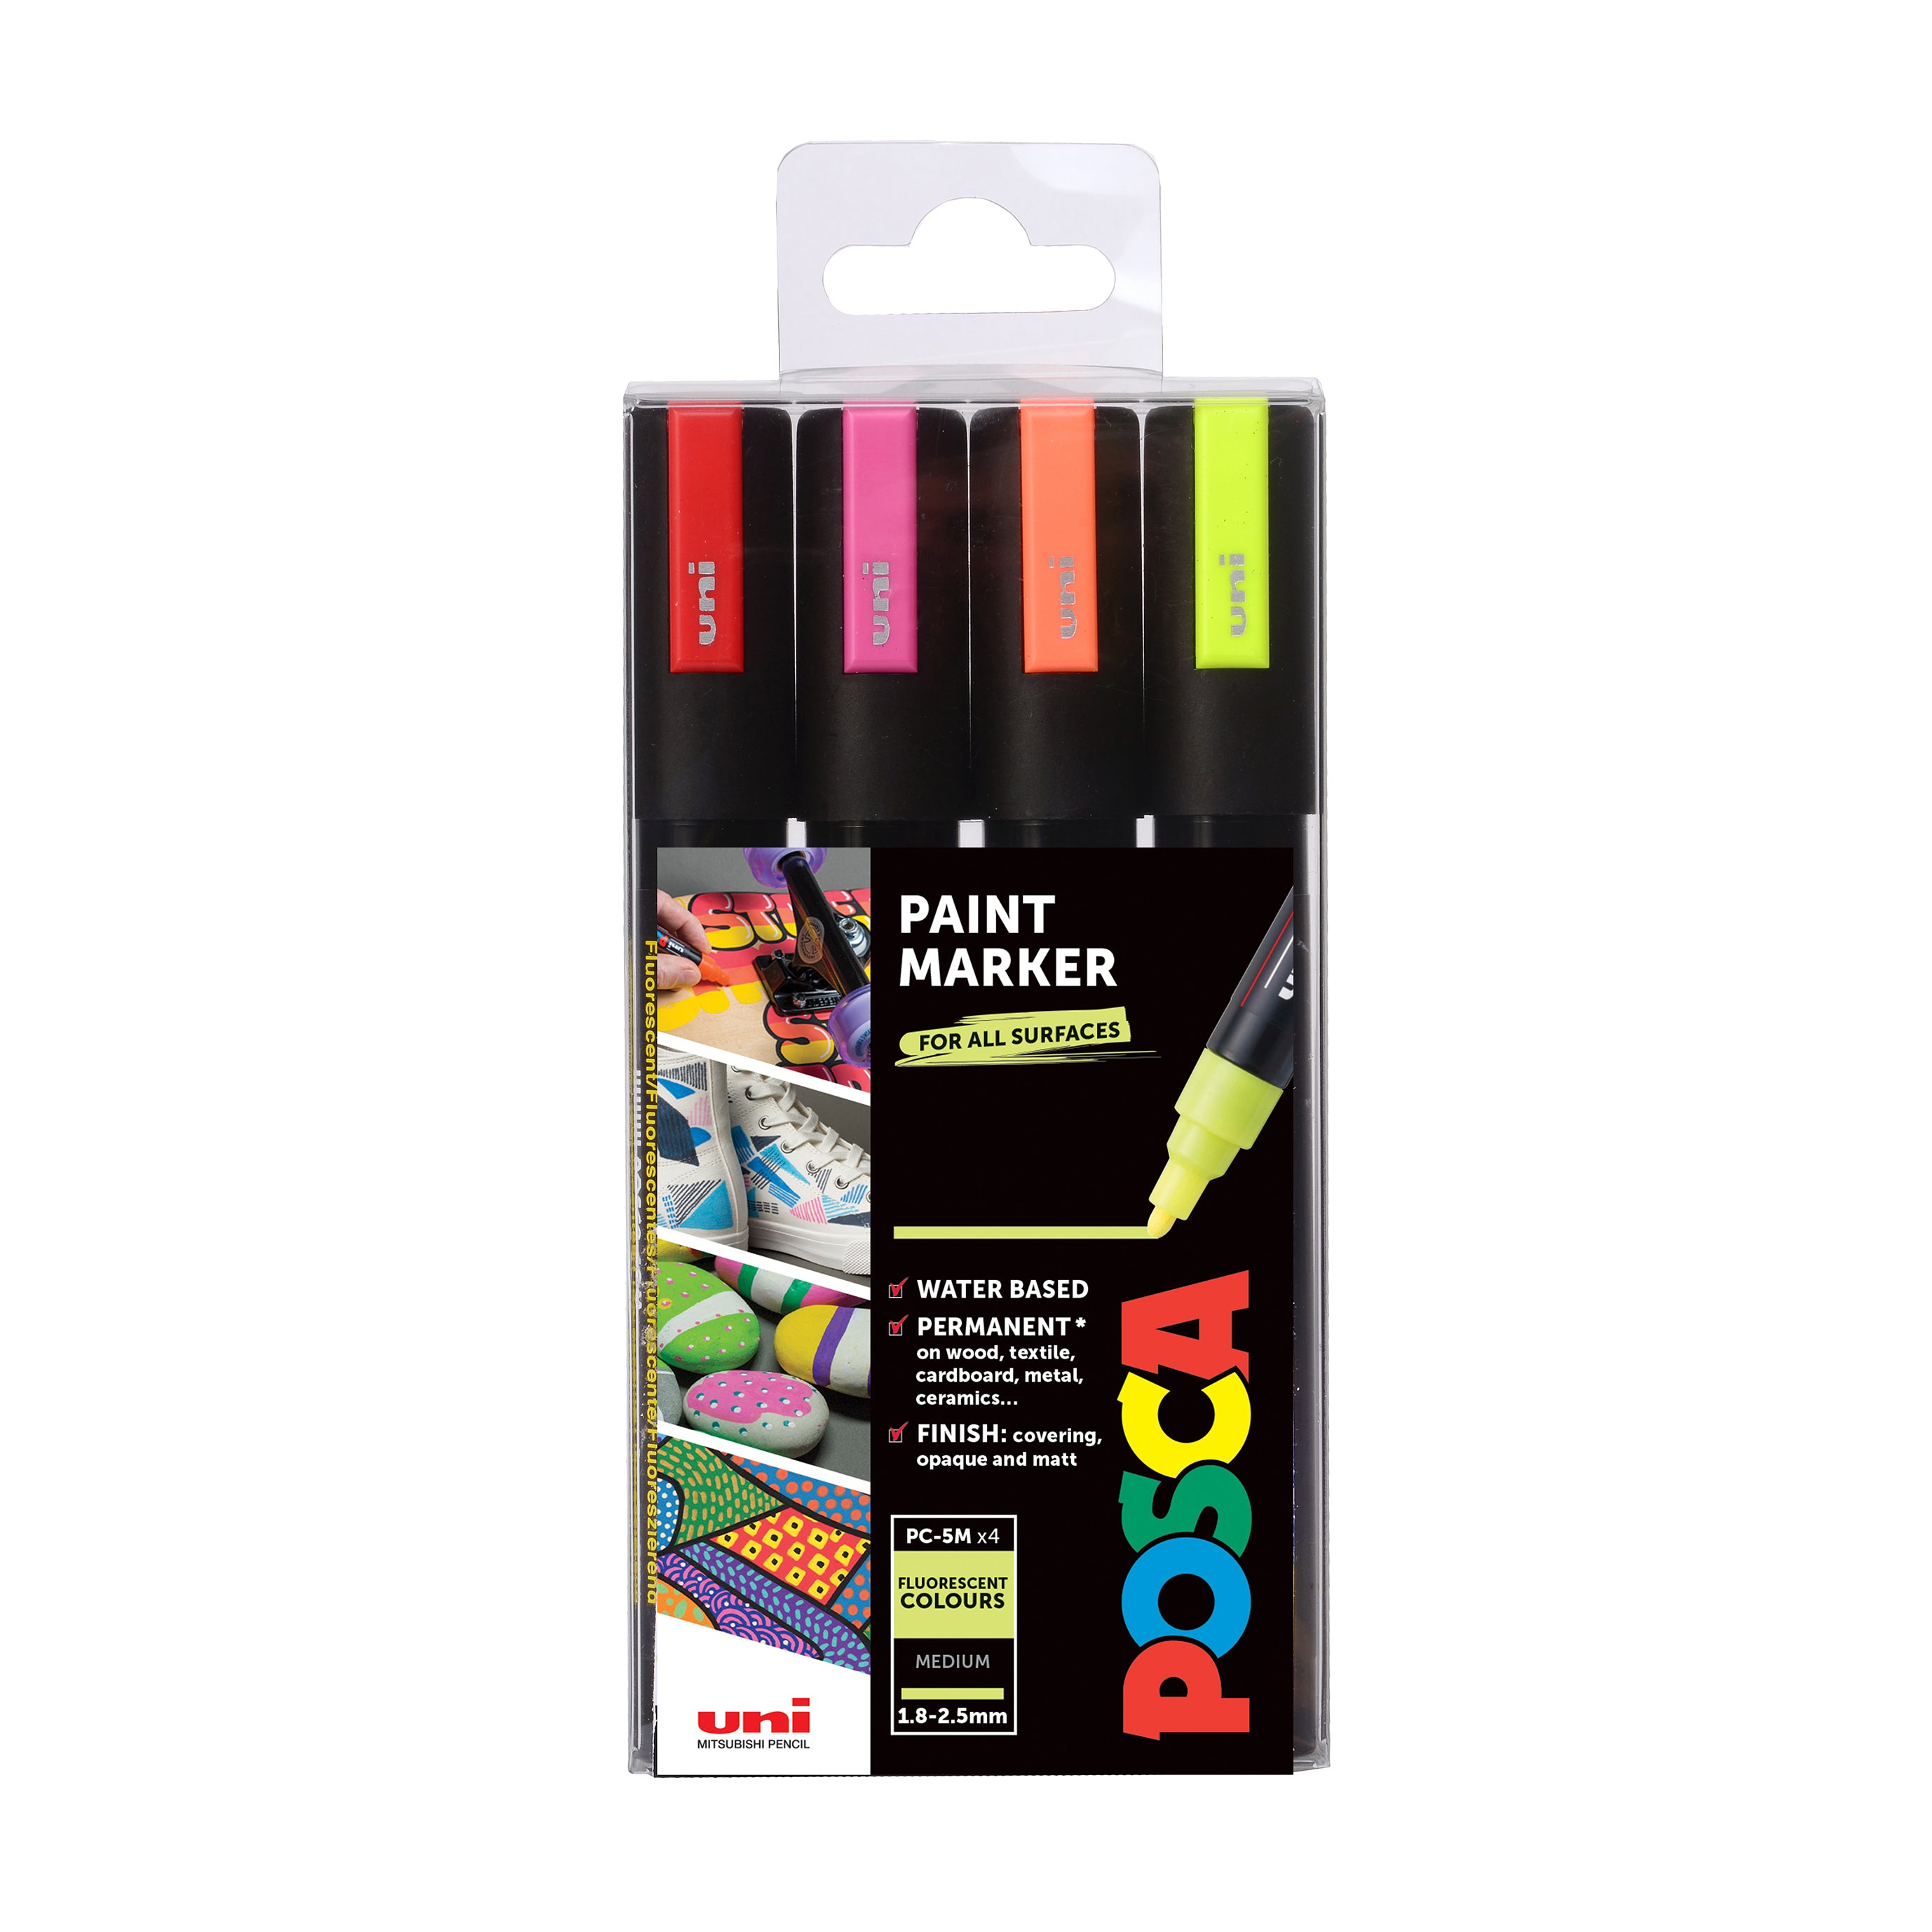 POSCA Markers PC-5M Set of 4 Primary Colours